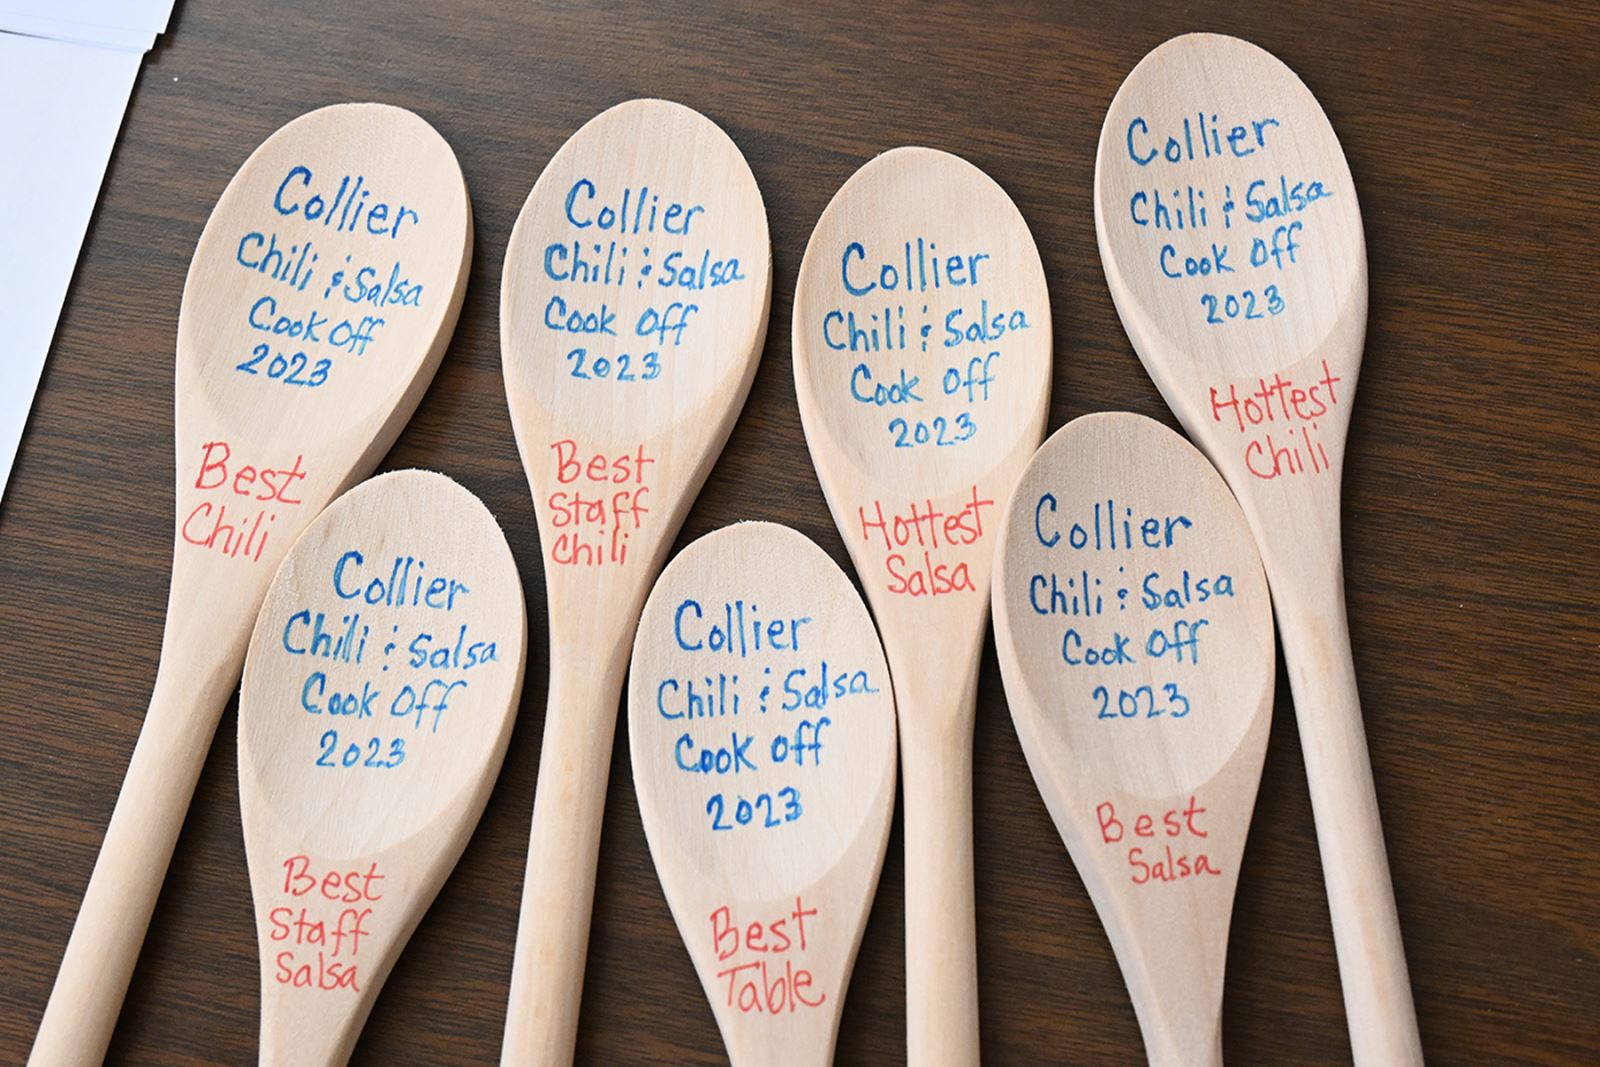 Wooden spoons were given out as awards for the best chilis.